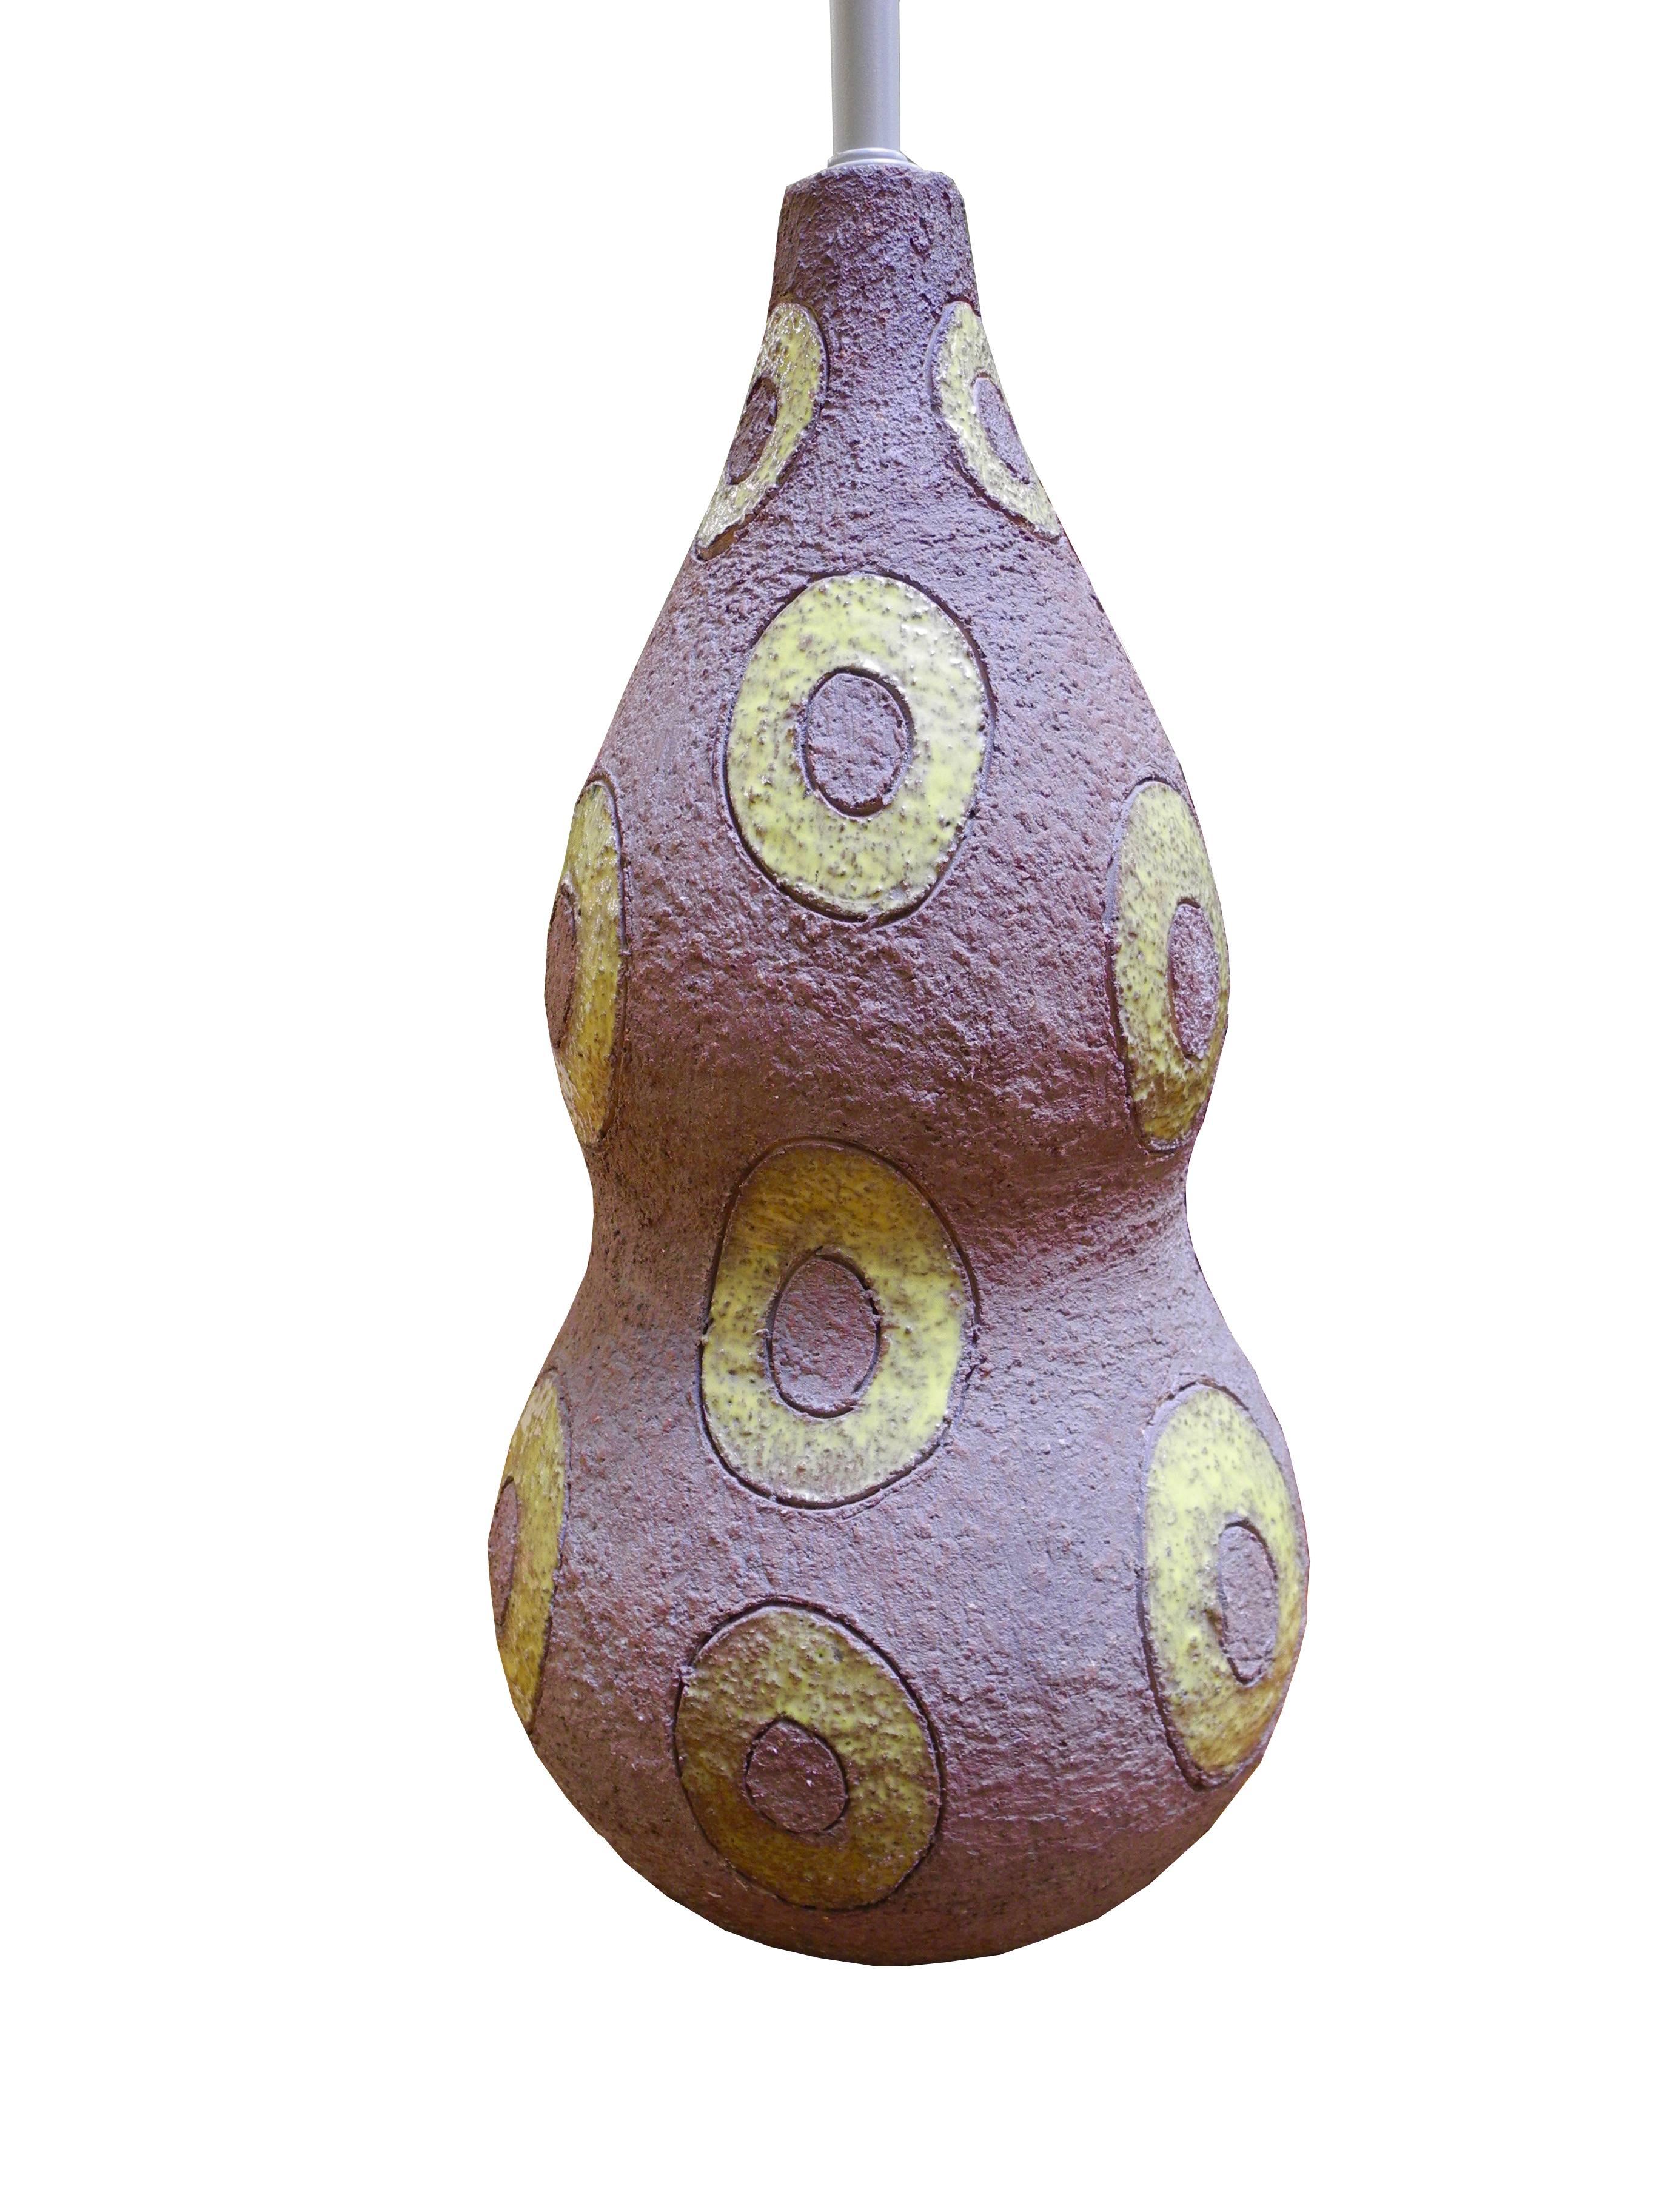 20th Century Mid-Century Modern Italian Textured Ceramic Lamp by Ugo Zaccagnini, 1950s For Sale